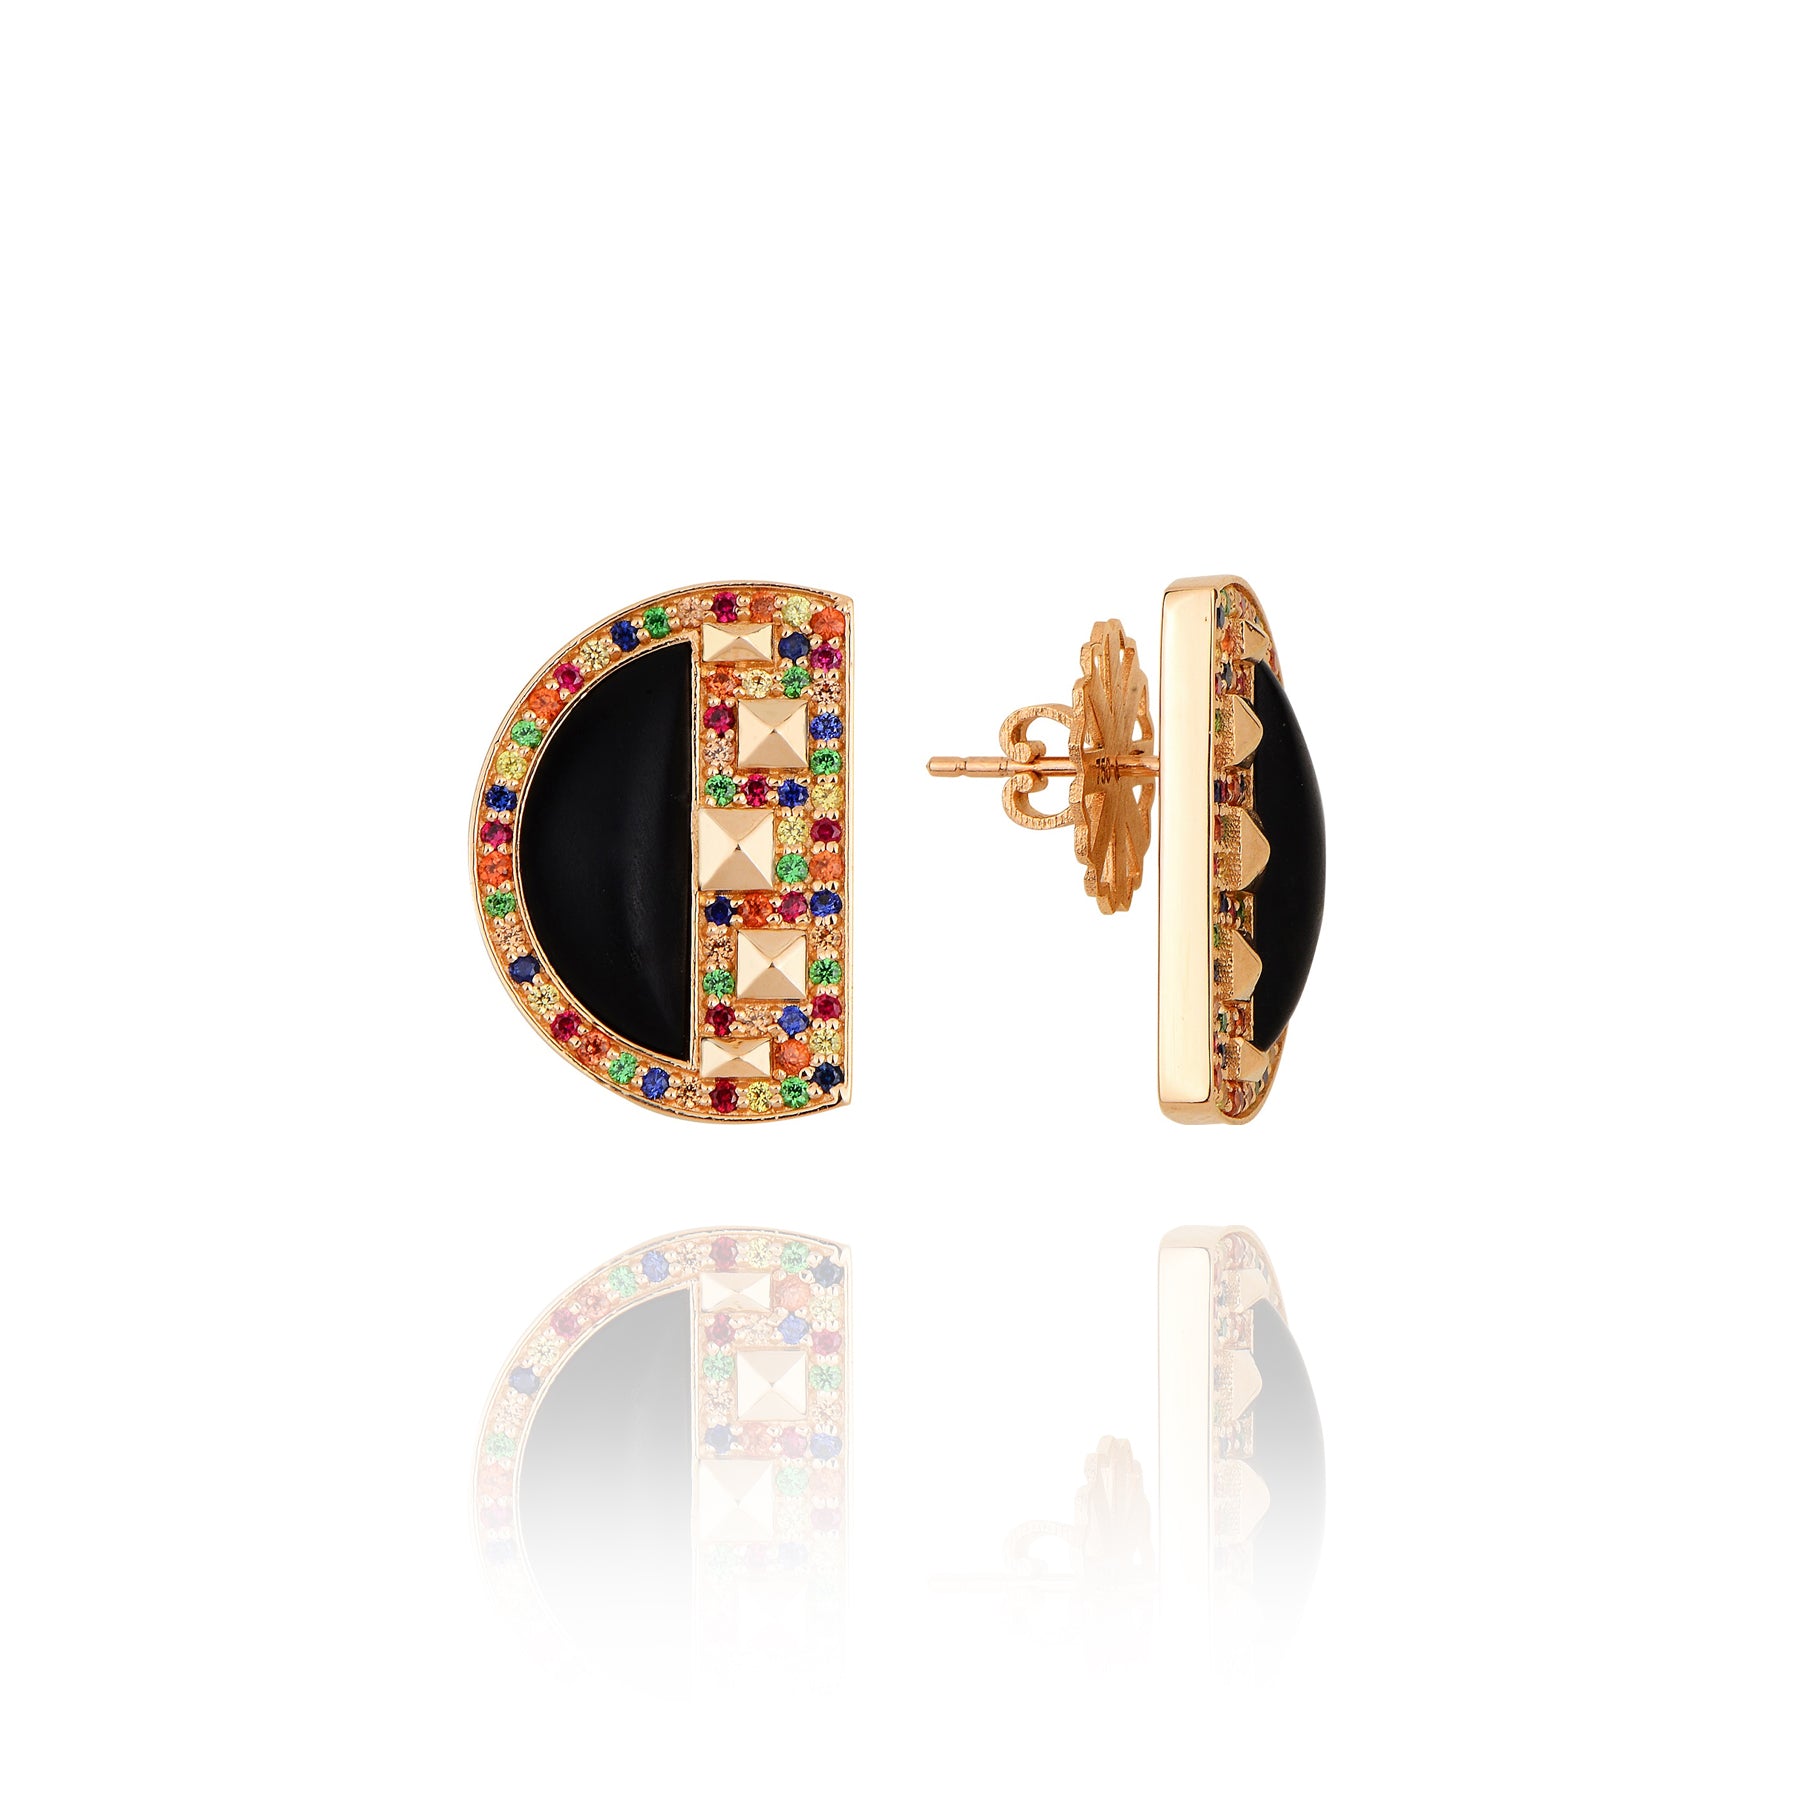 Neutra Cairo Earrings Diversity Edition with Multicolor Sapphire